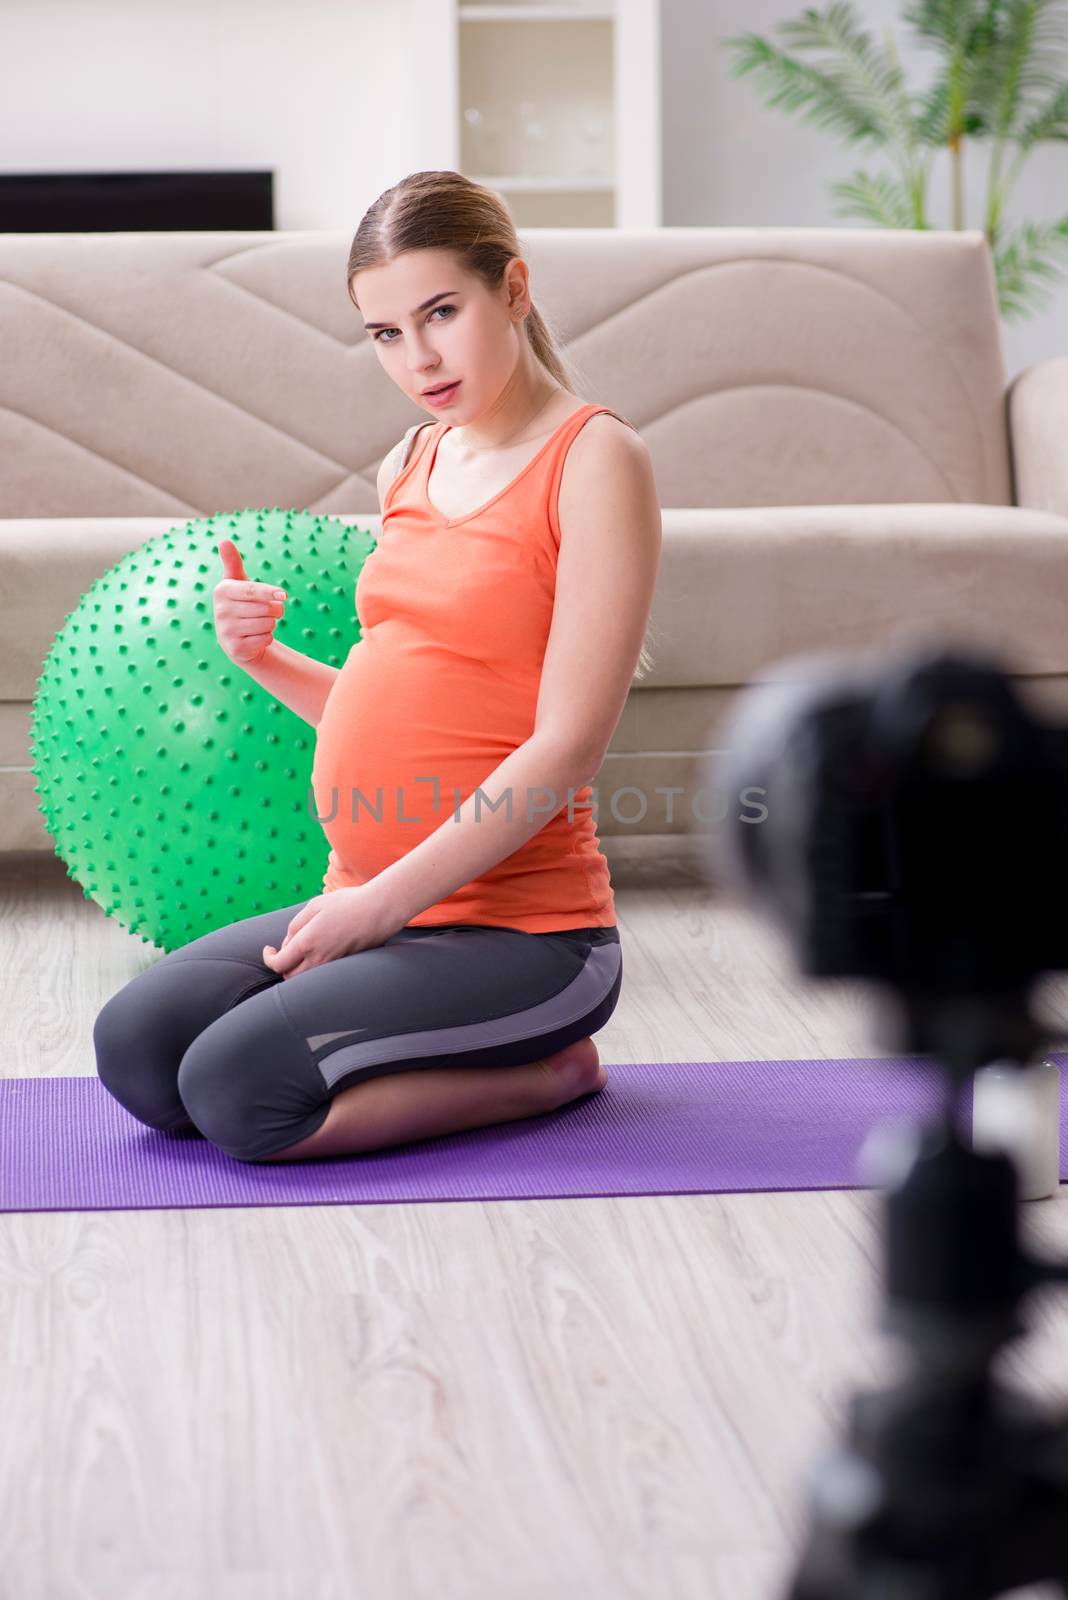 Pregnant woman recording video for blog and vlog by Elnur